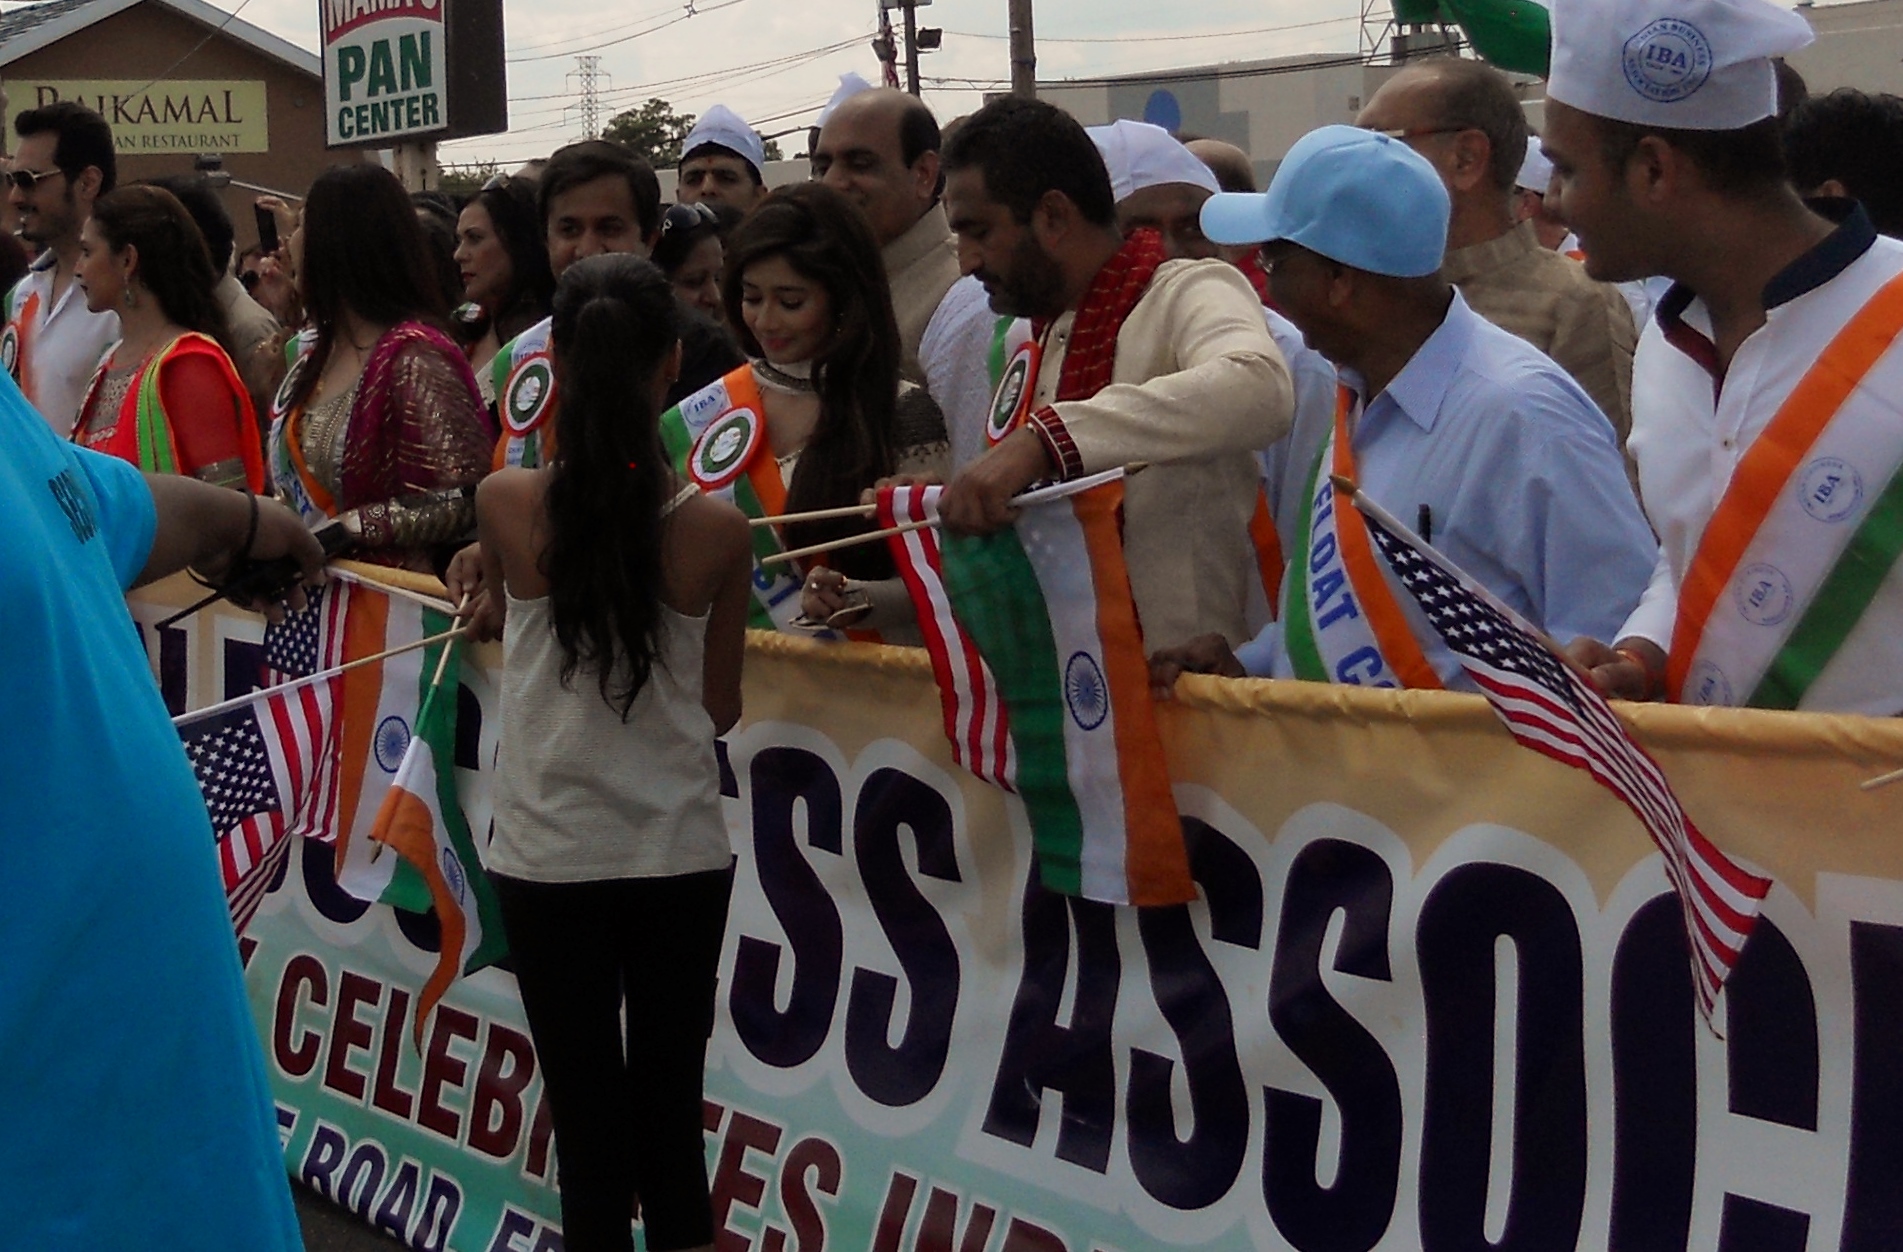 Chetna Goel taking autograph from bollywood actress Tina Dutta in India Day Parade 2014. Other bollywood celebrities in the photo are Esha Deol, Nitu Singh and Omi Vaidya.